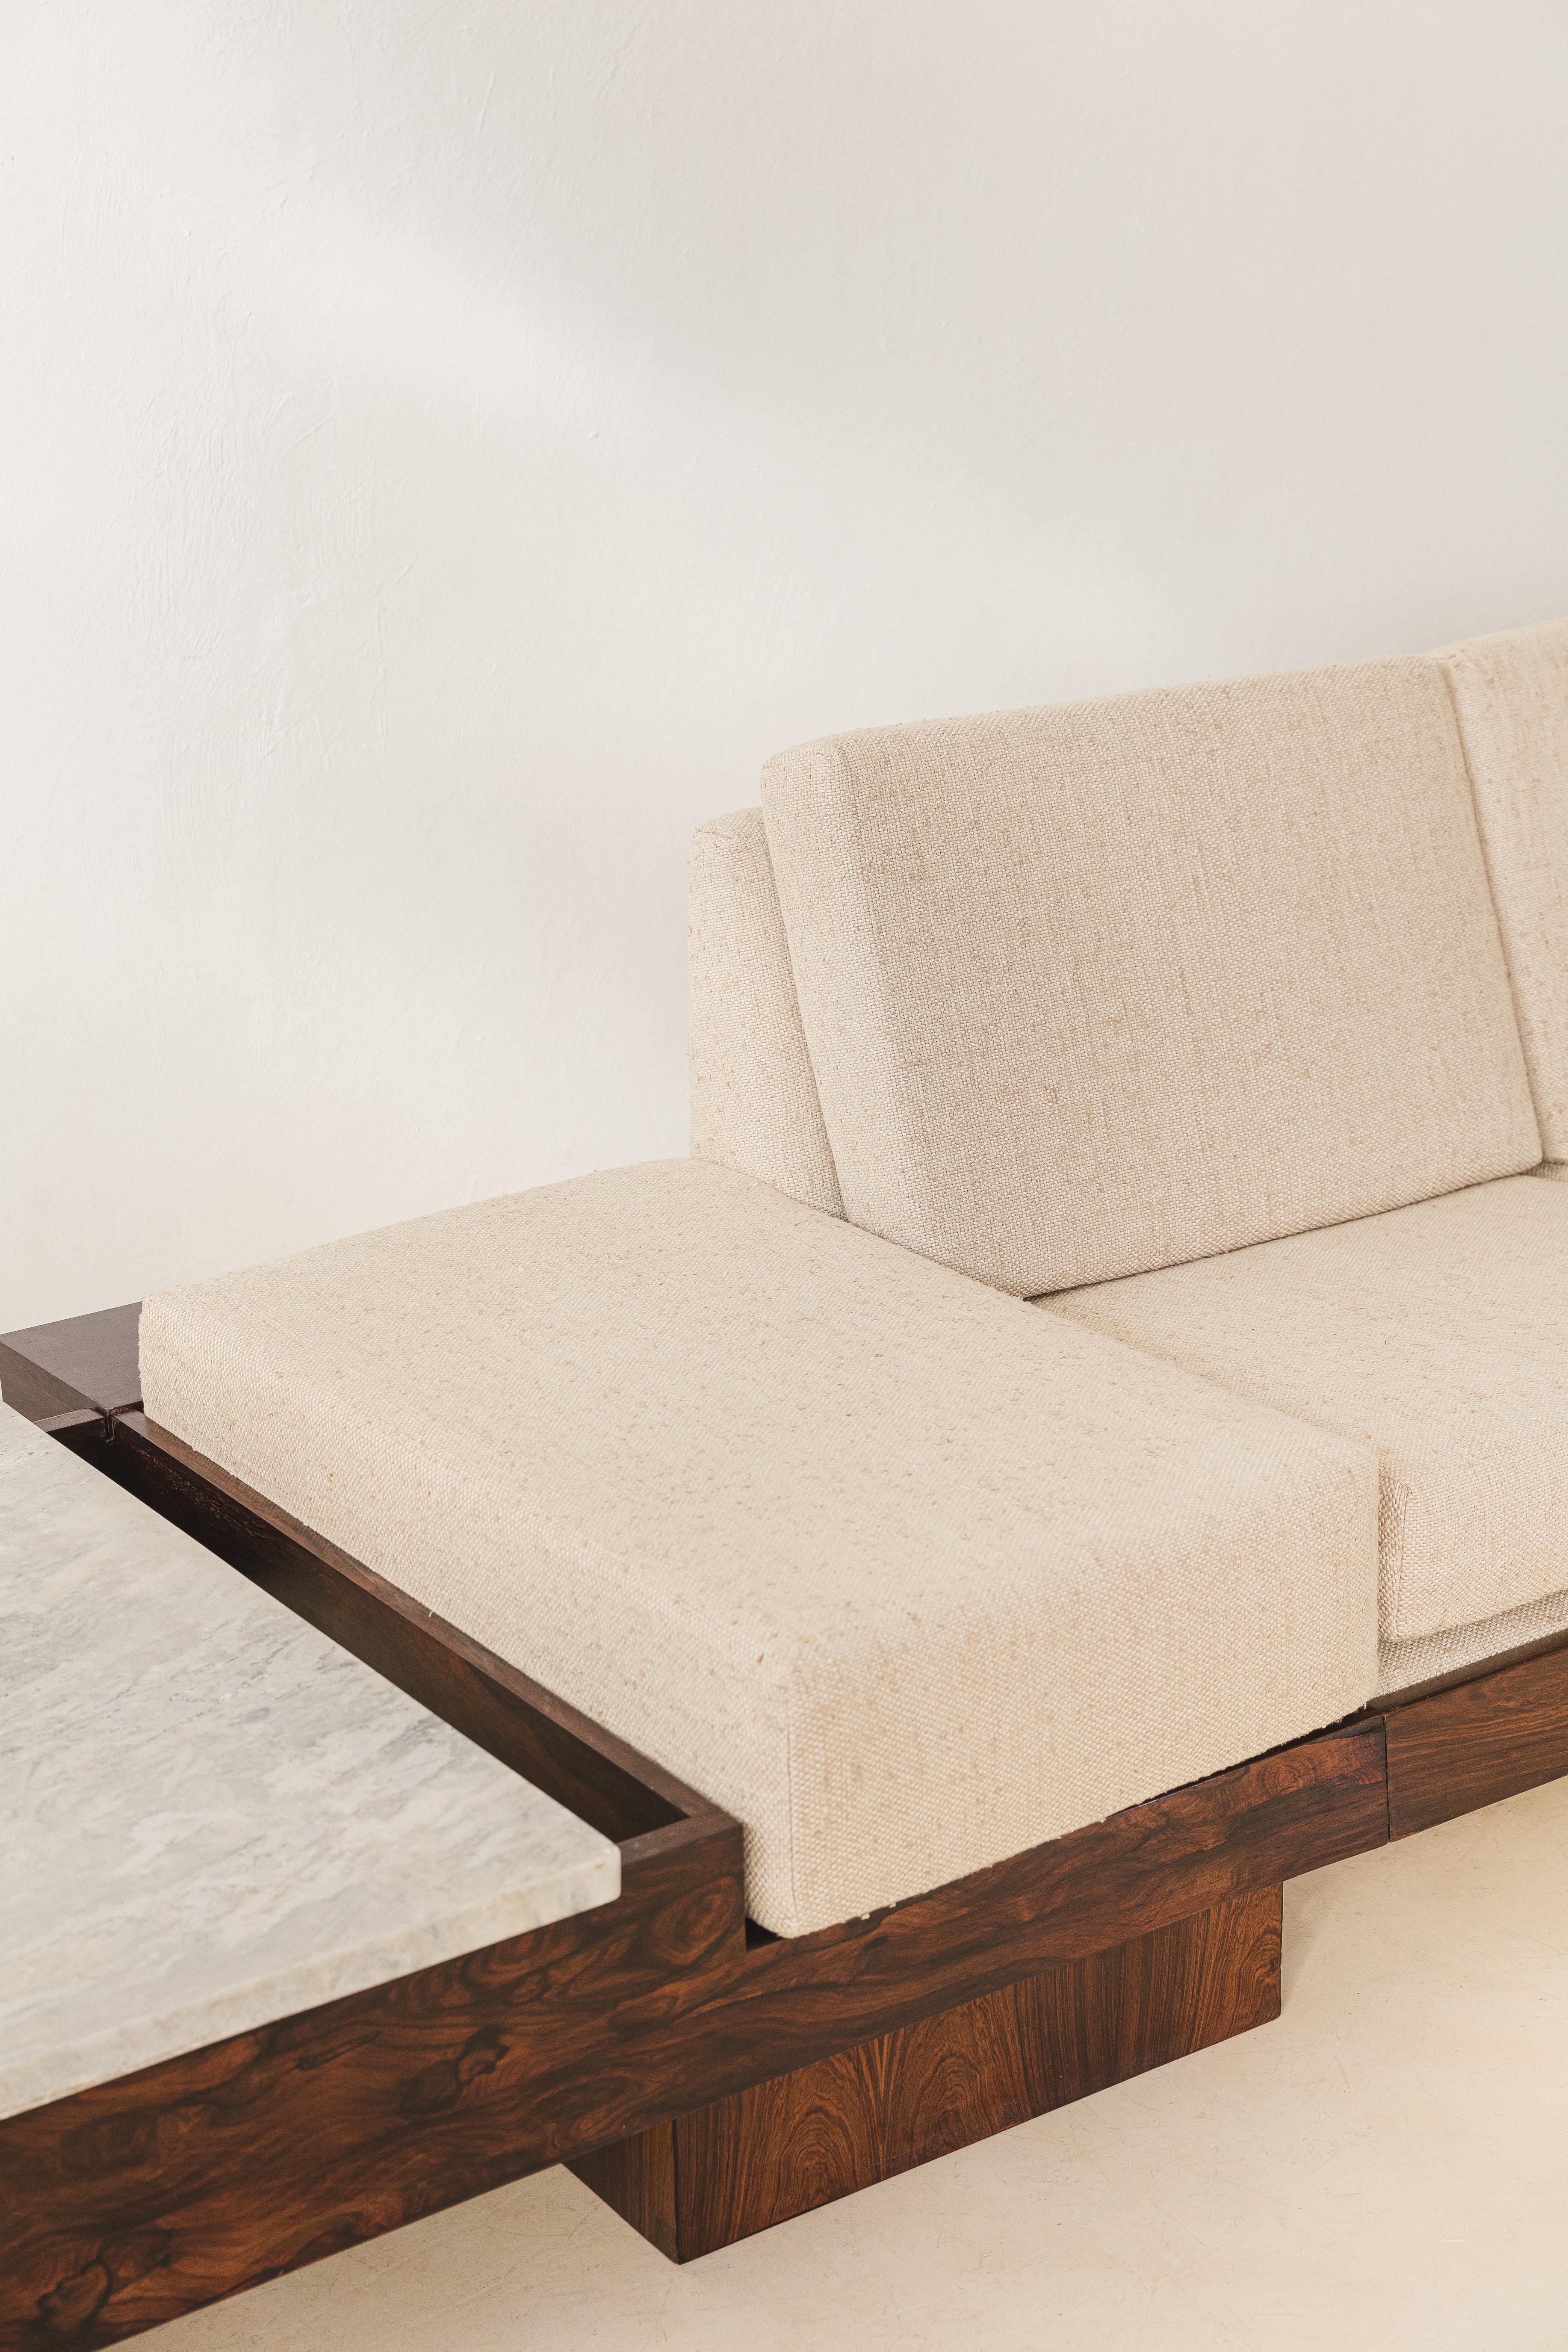 Midcentury Brazilian Sofa Design by Joaquim Tenreiro, Rosewood and Marble, 1960s For Sale 1